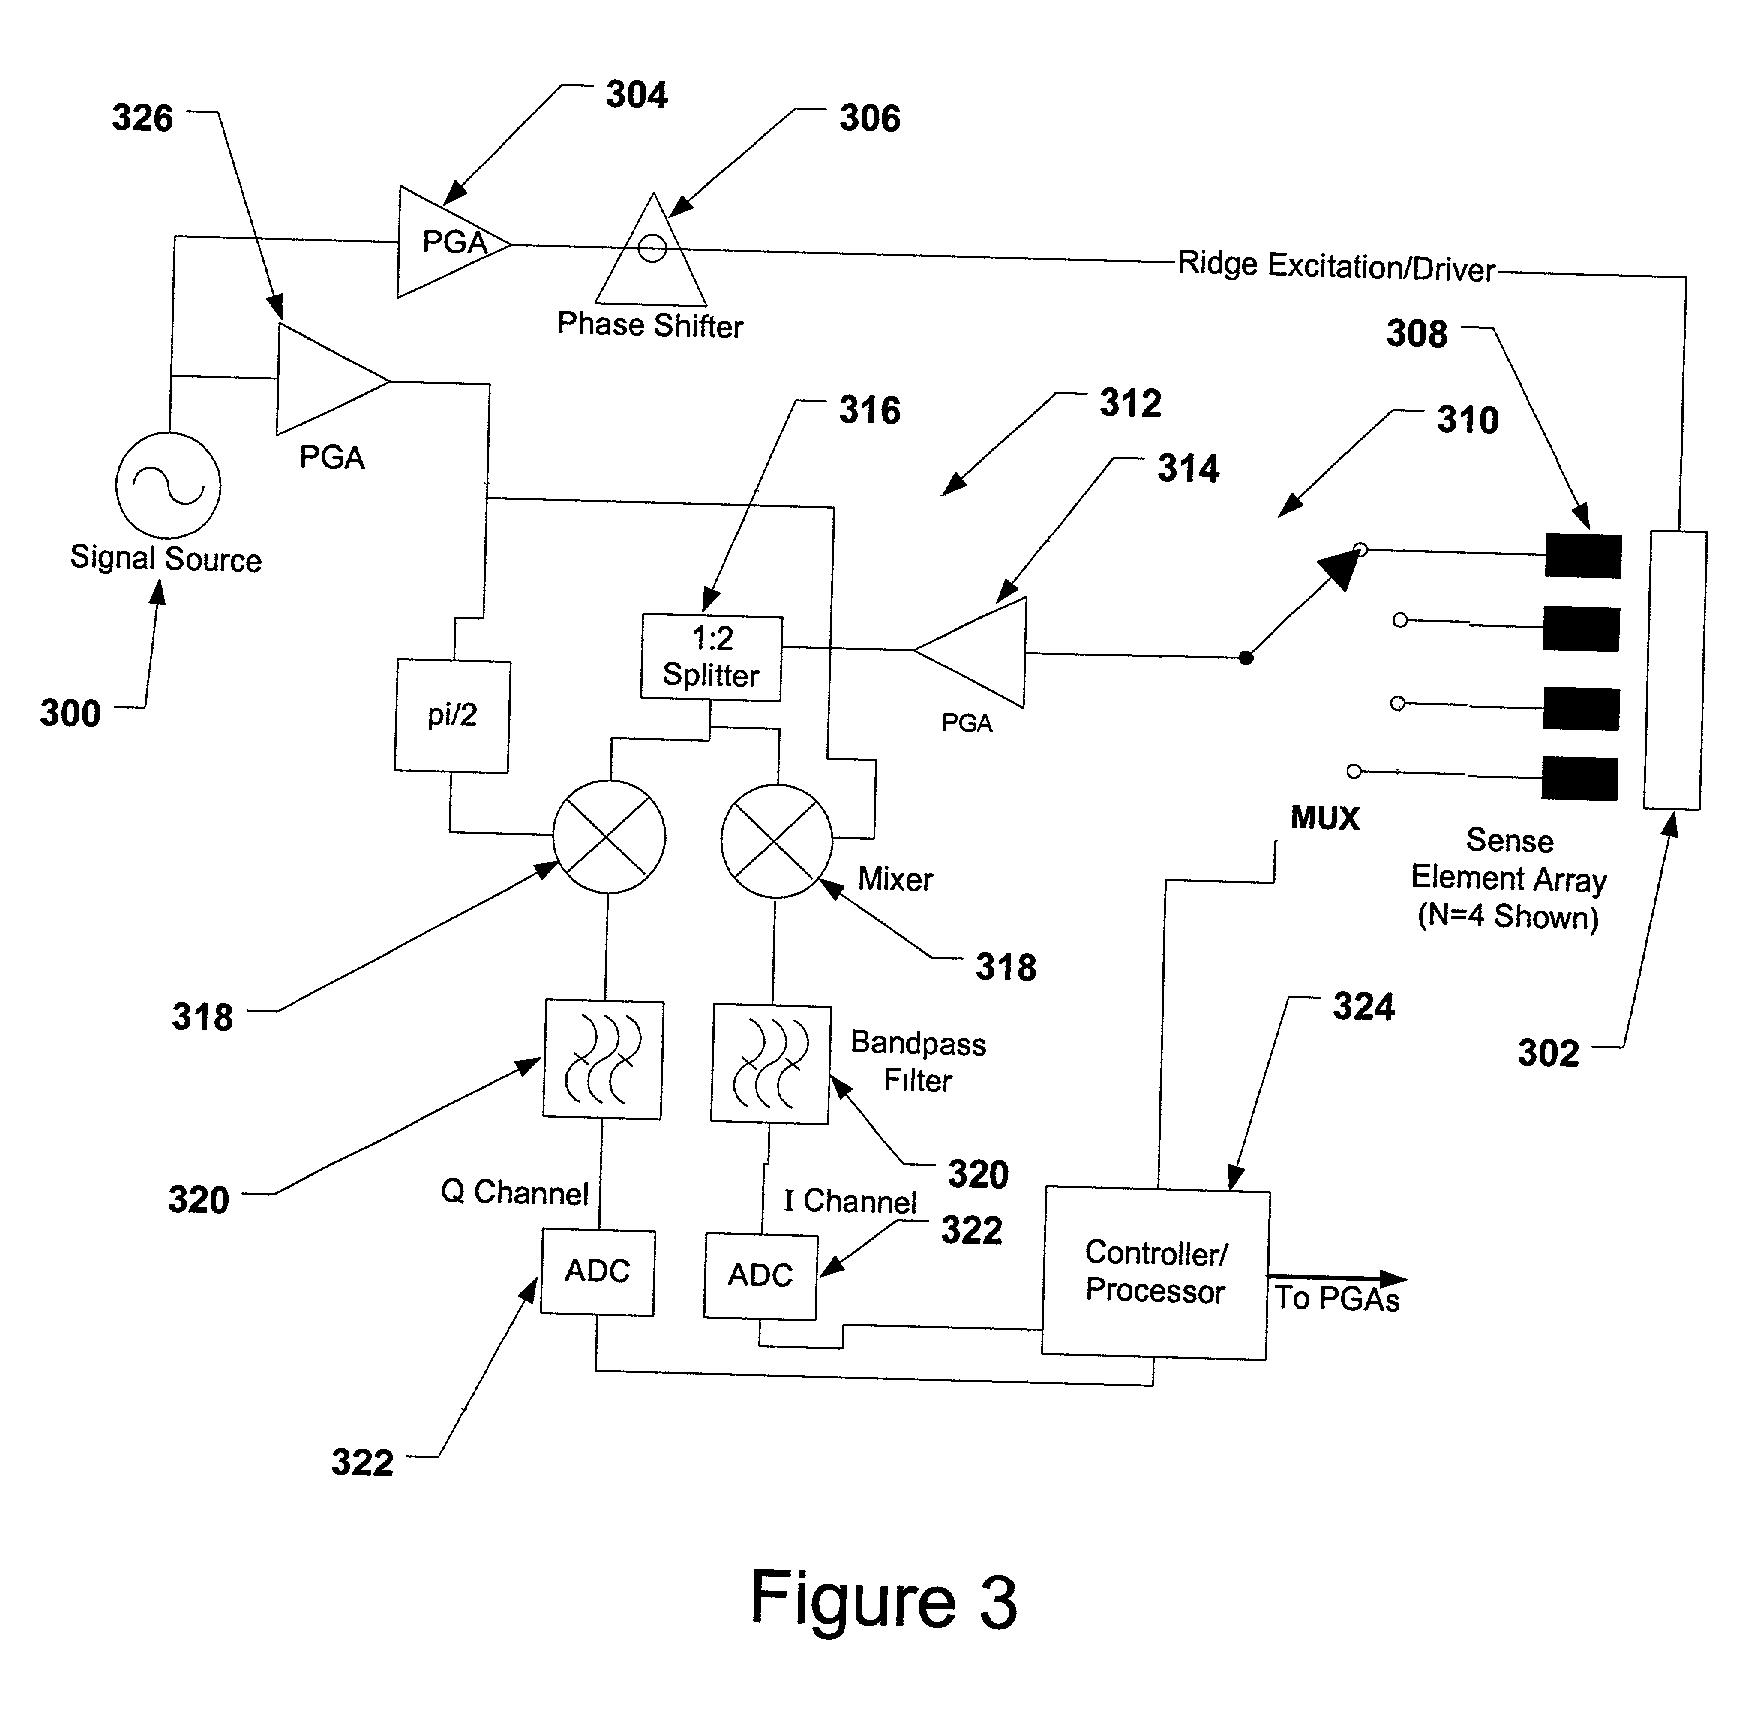 Sensor apparatus and method for use in imaging features of an object